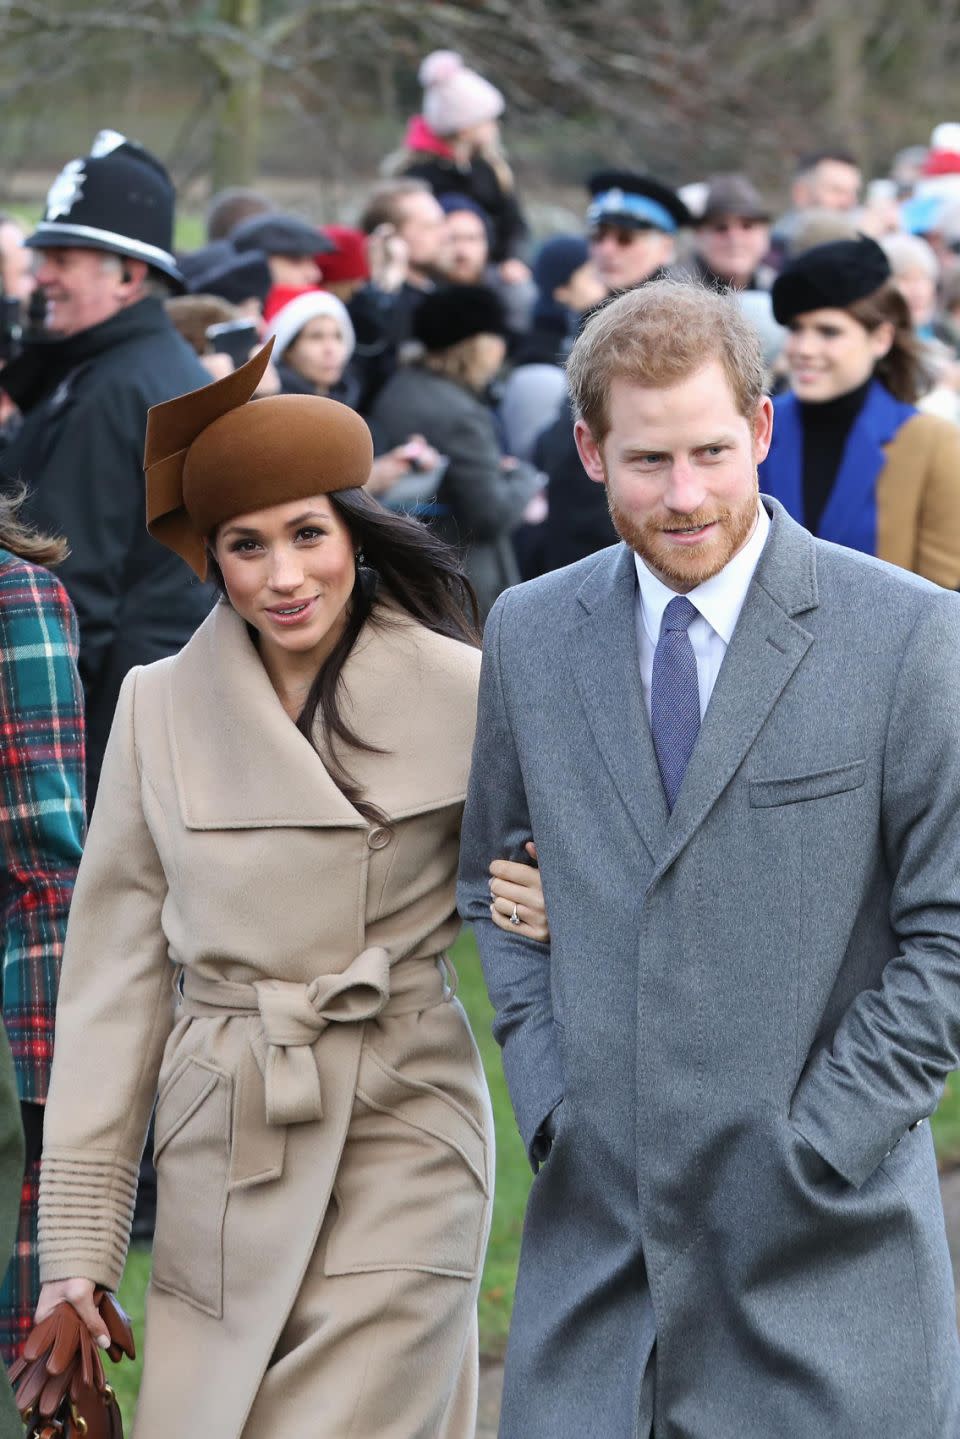 Meghan wants to do her wedding to Prince Harry her way. Photo: Getty